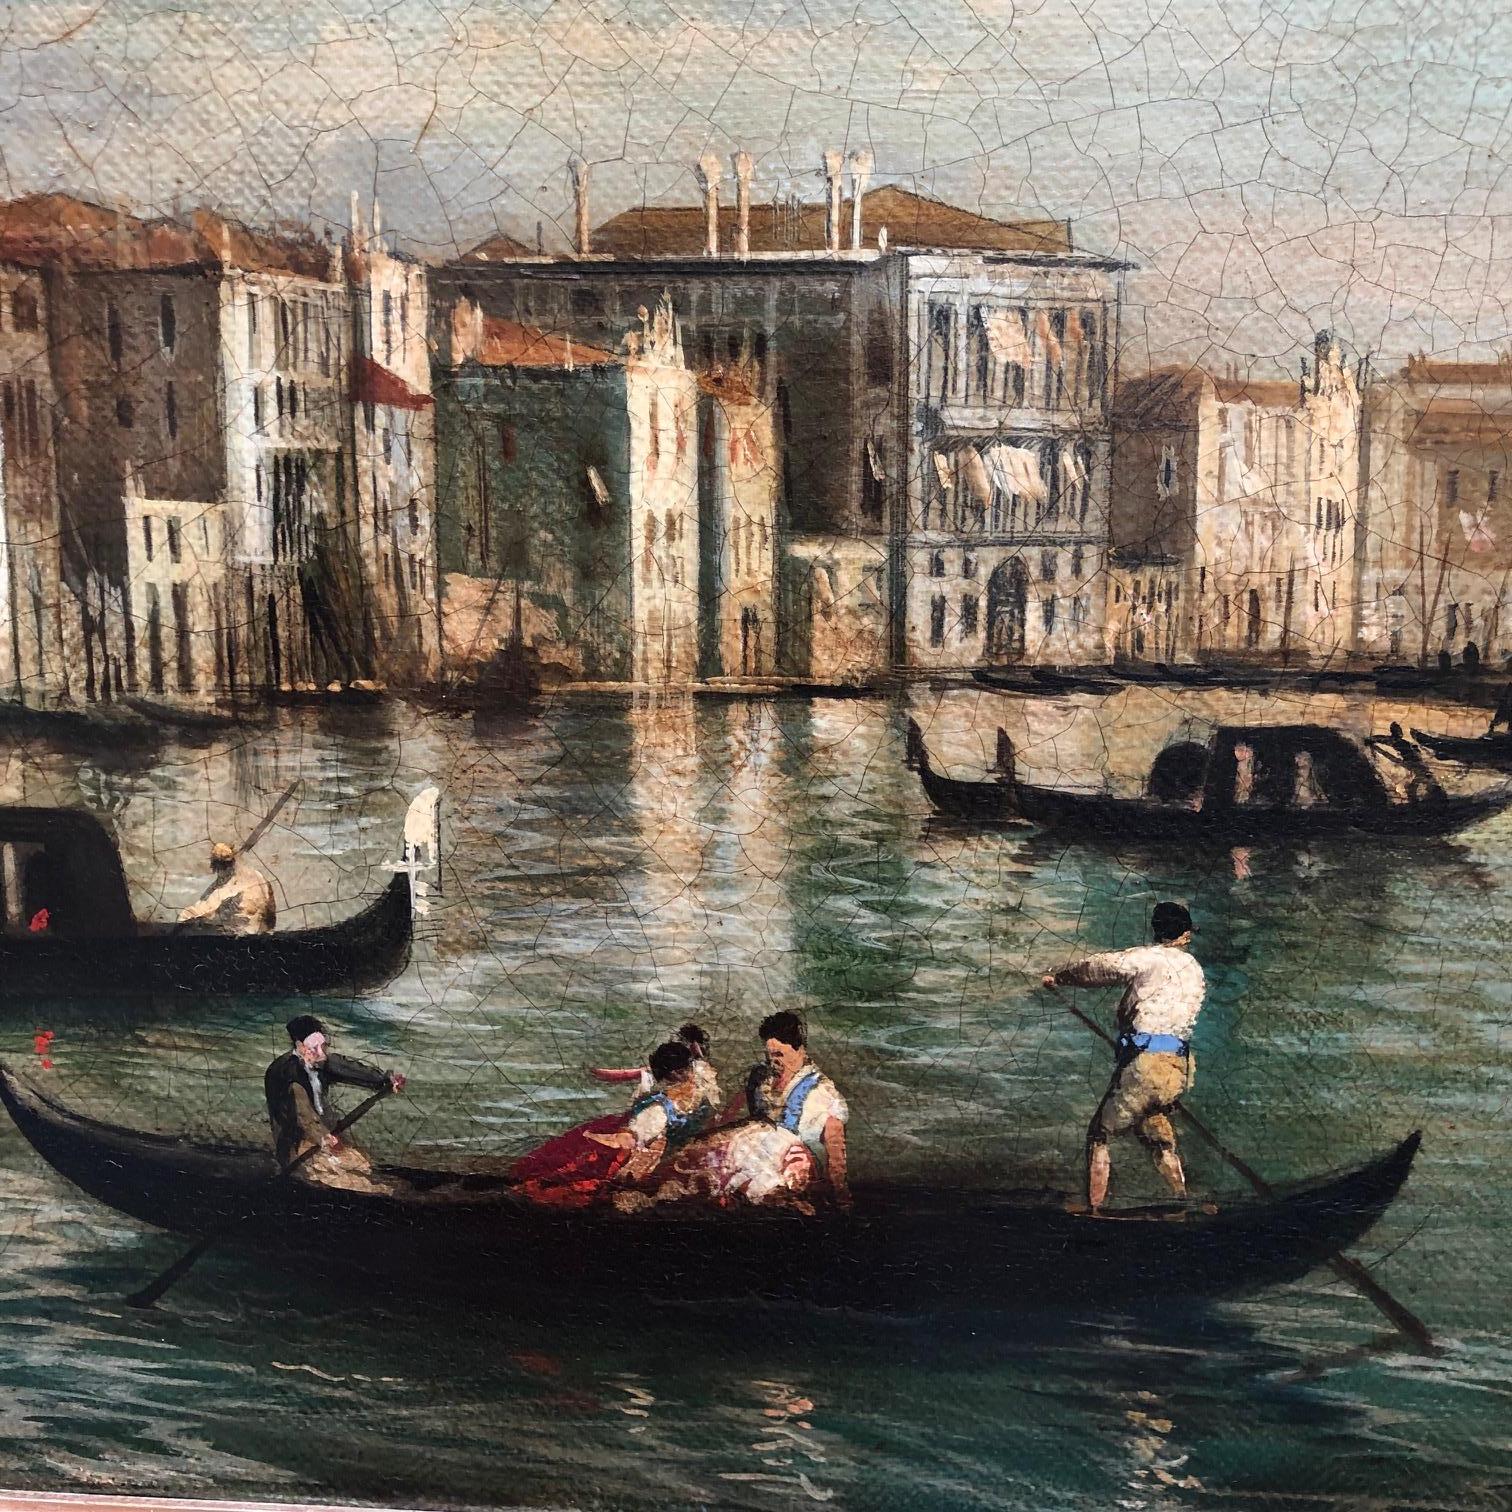 Venice - Giancarlo Gorini Italia 2002 - Oil on canvas cm.50x130

Giancarlo Gorini's canvas is an extraordinary work of Italian landscape painting. It is inspired by the paintings of the great Maestro Giovanni Antonio Canali known as Canaletto.